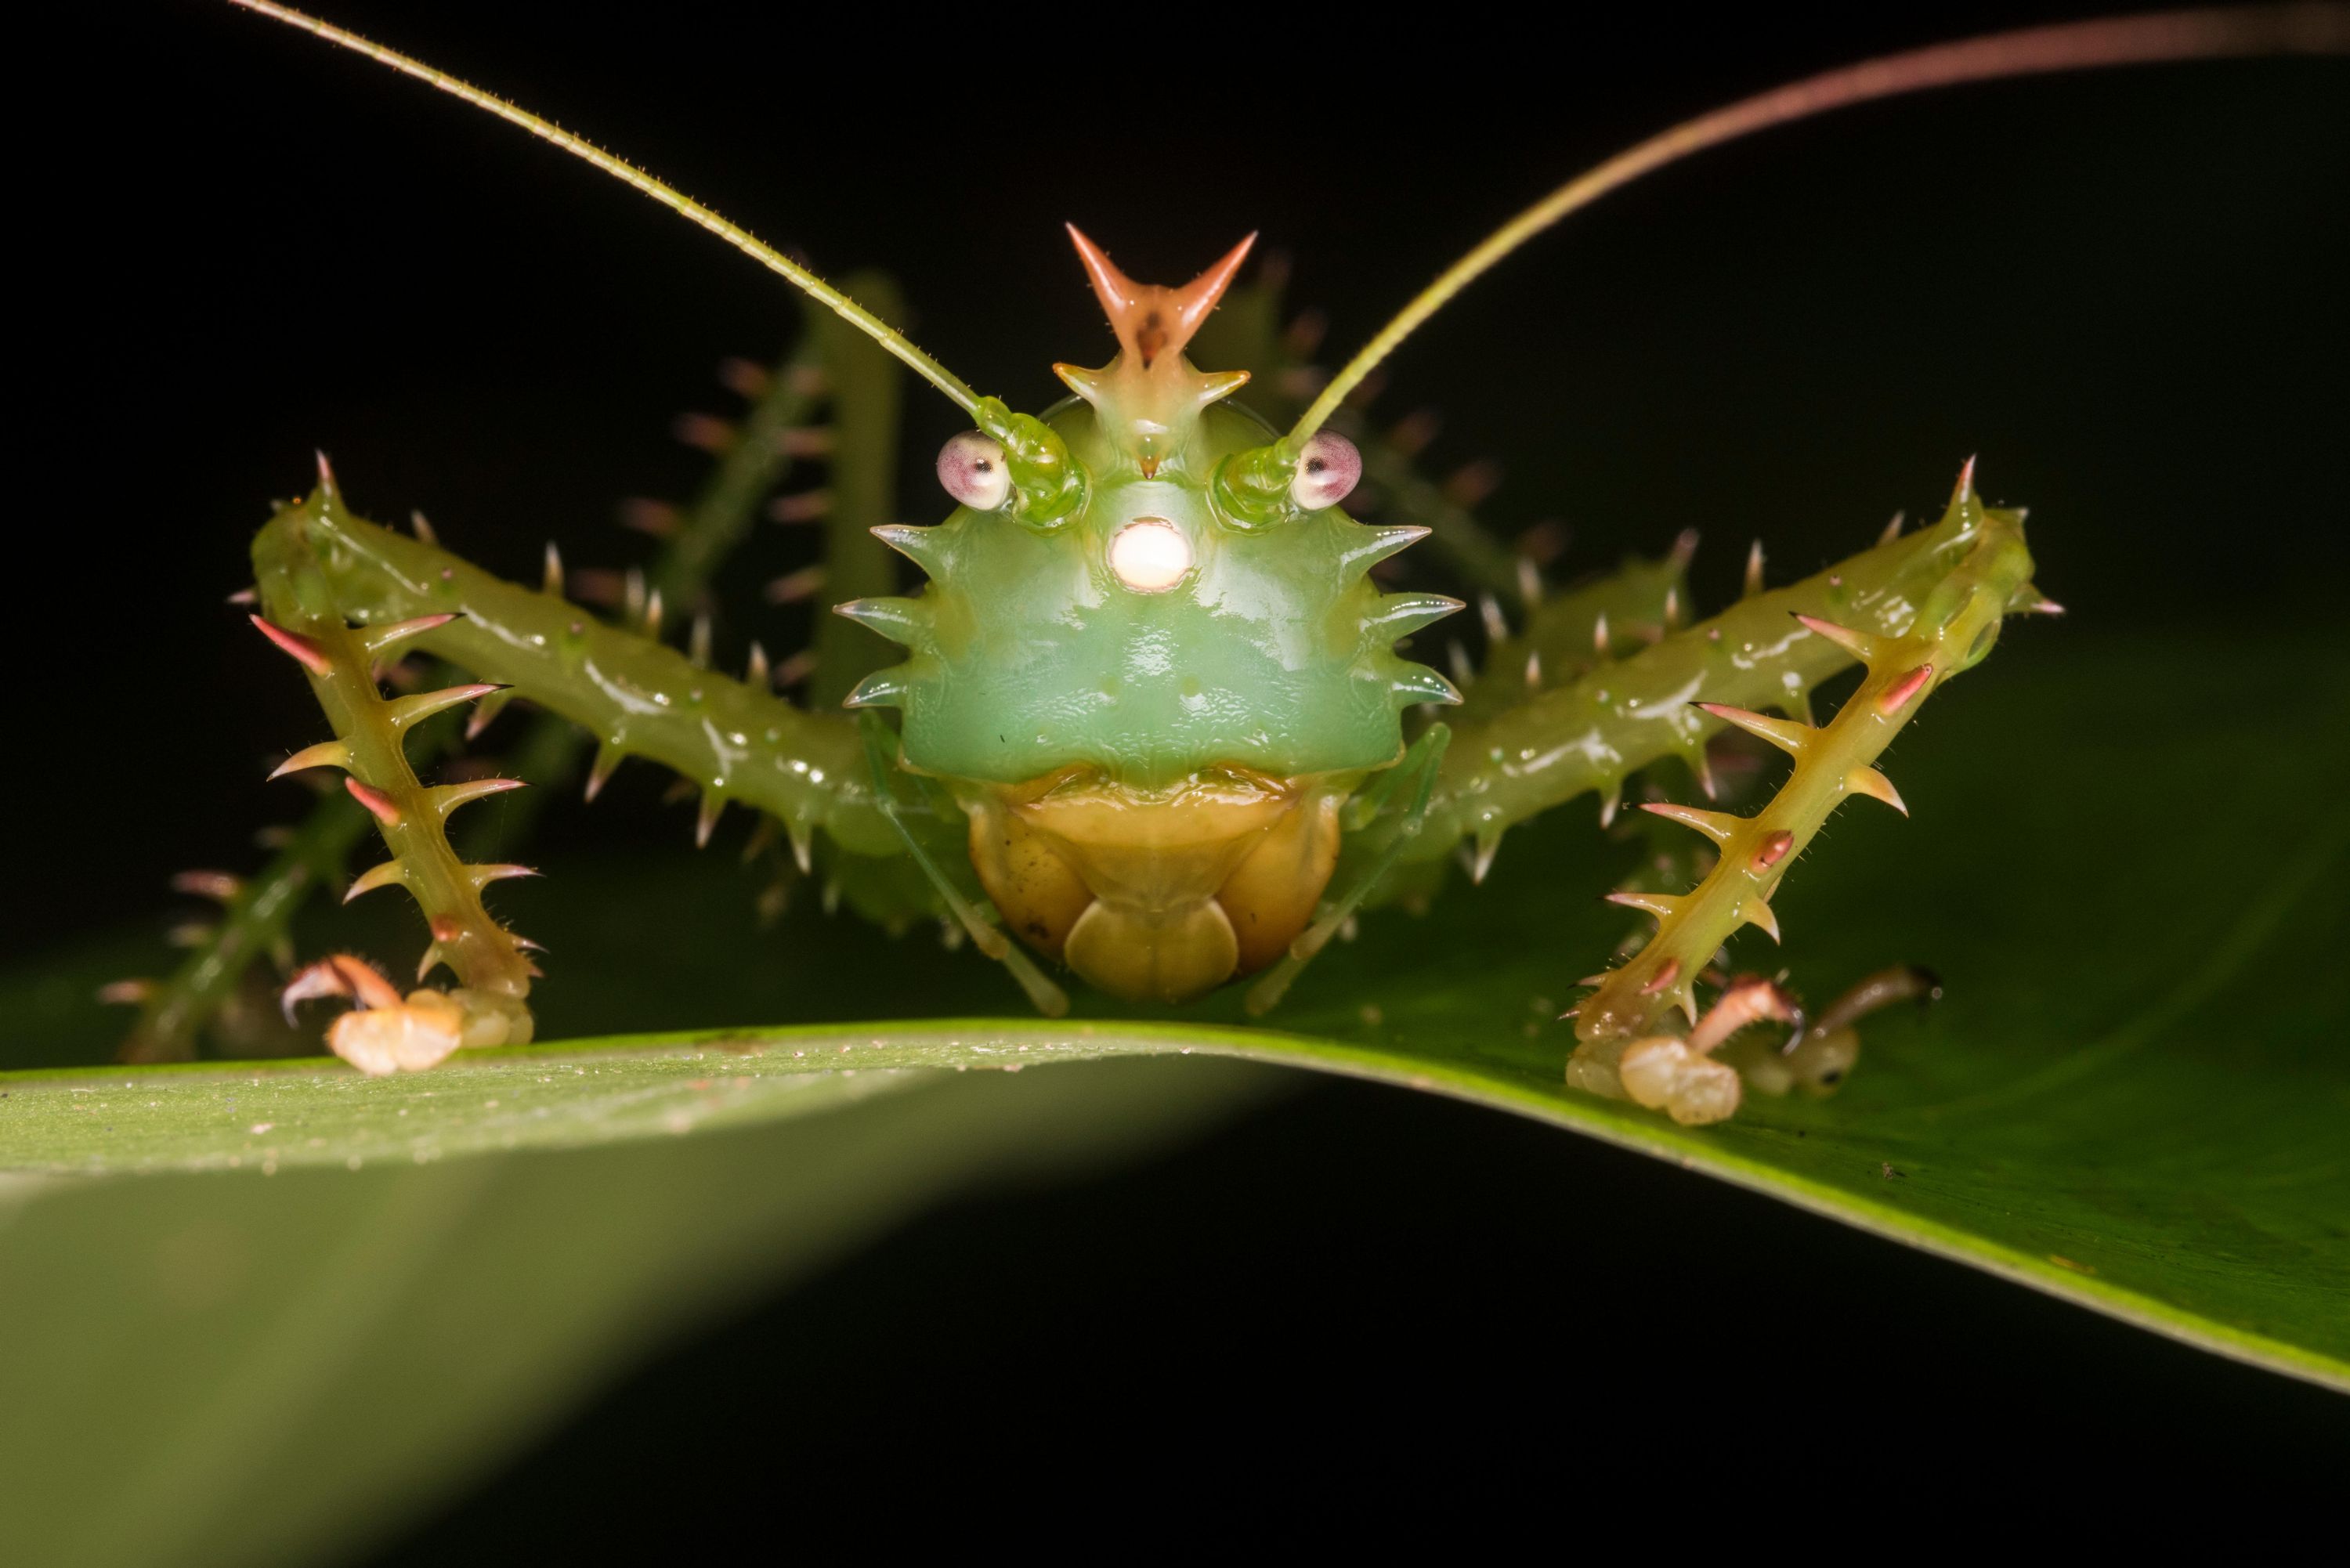 Awesome Ears: The Weird World of Insect Hearing - Scientific American